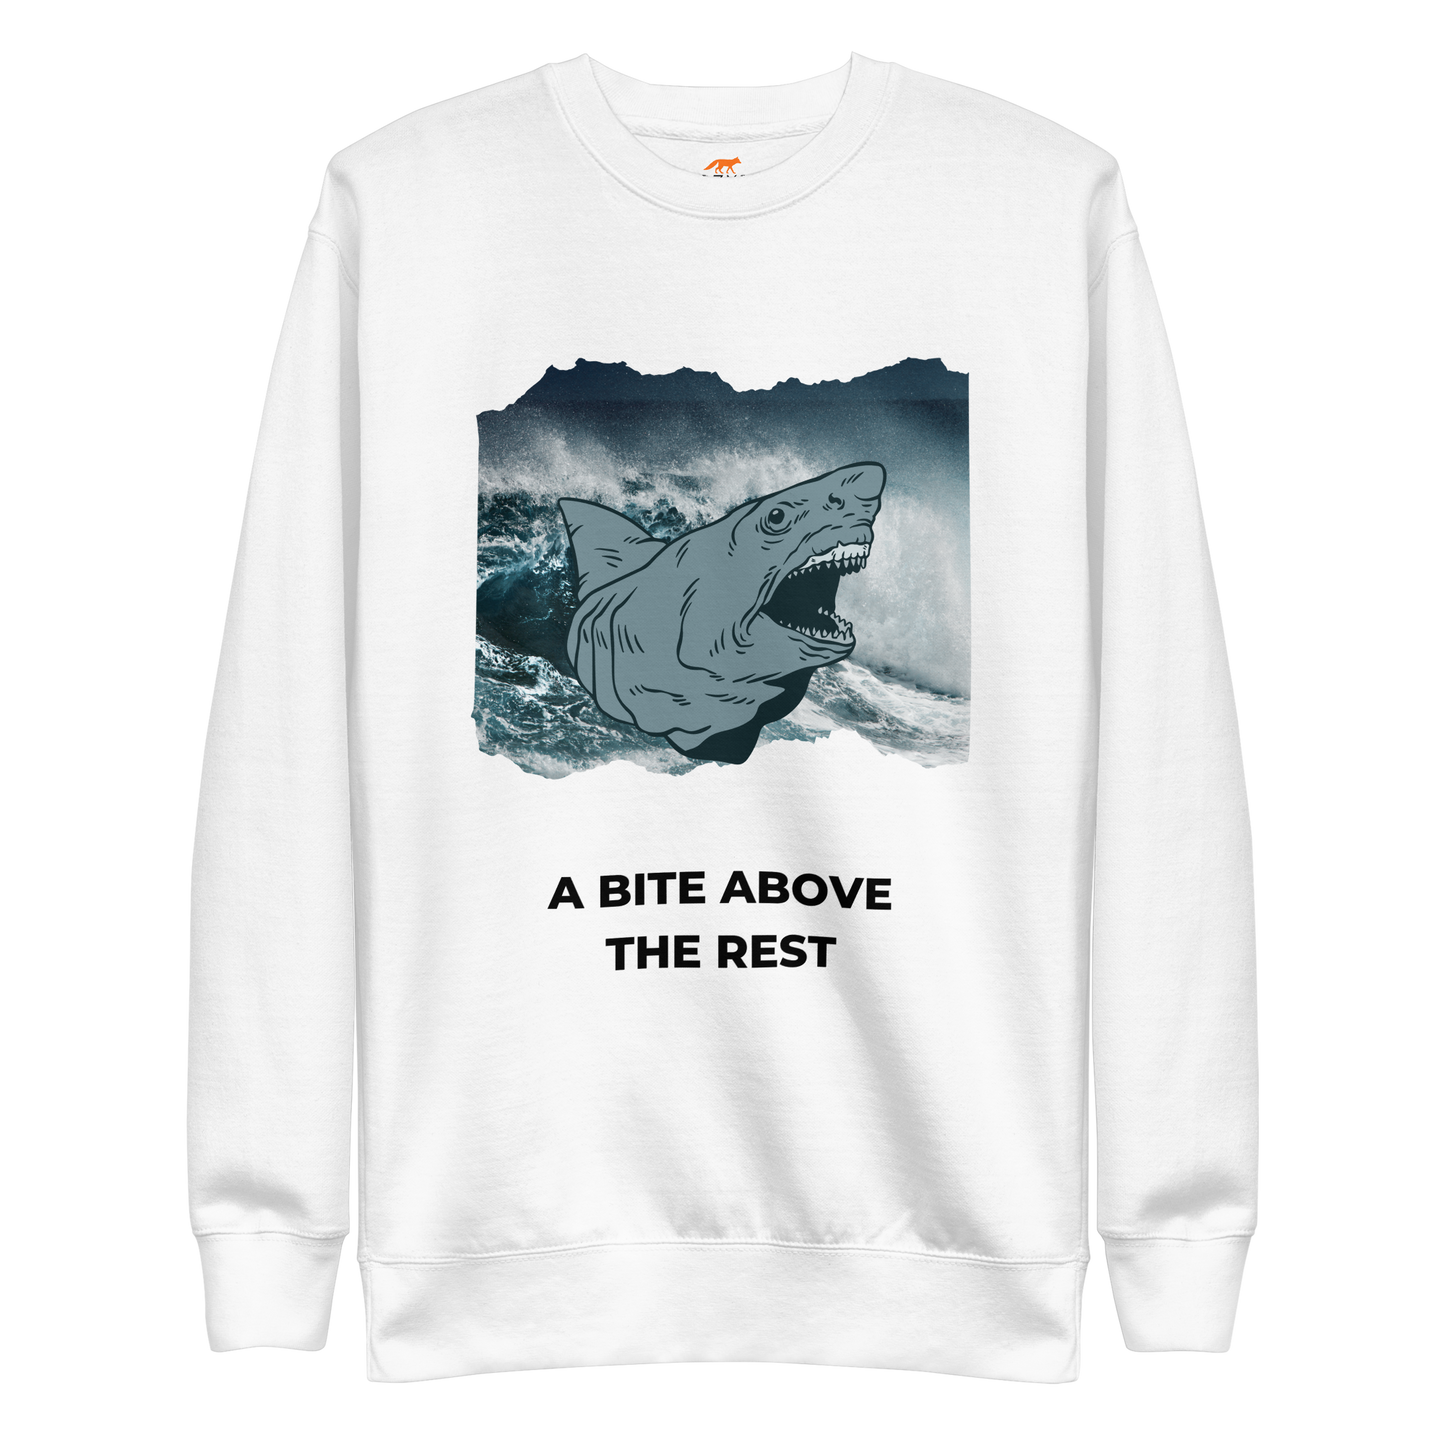 White Premium Megalodon Sweatshirt featuring the jaw-dropping 'A Bite Above the Rest' graphic on the chest - Funny Graphic Megalodon Sweatshirts - Boozy Fox